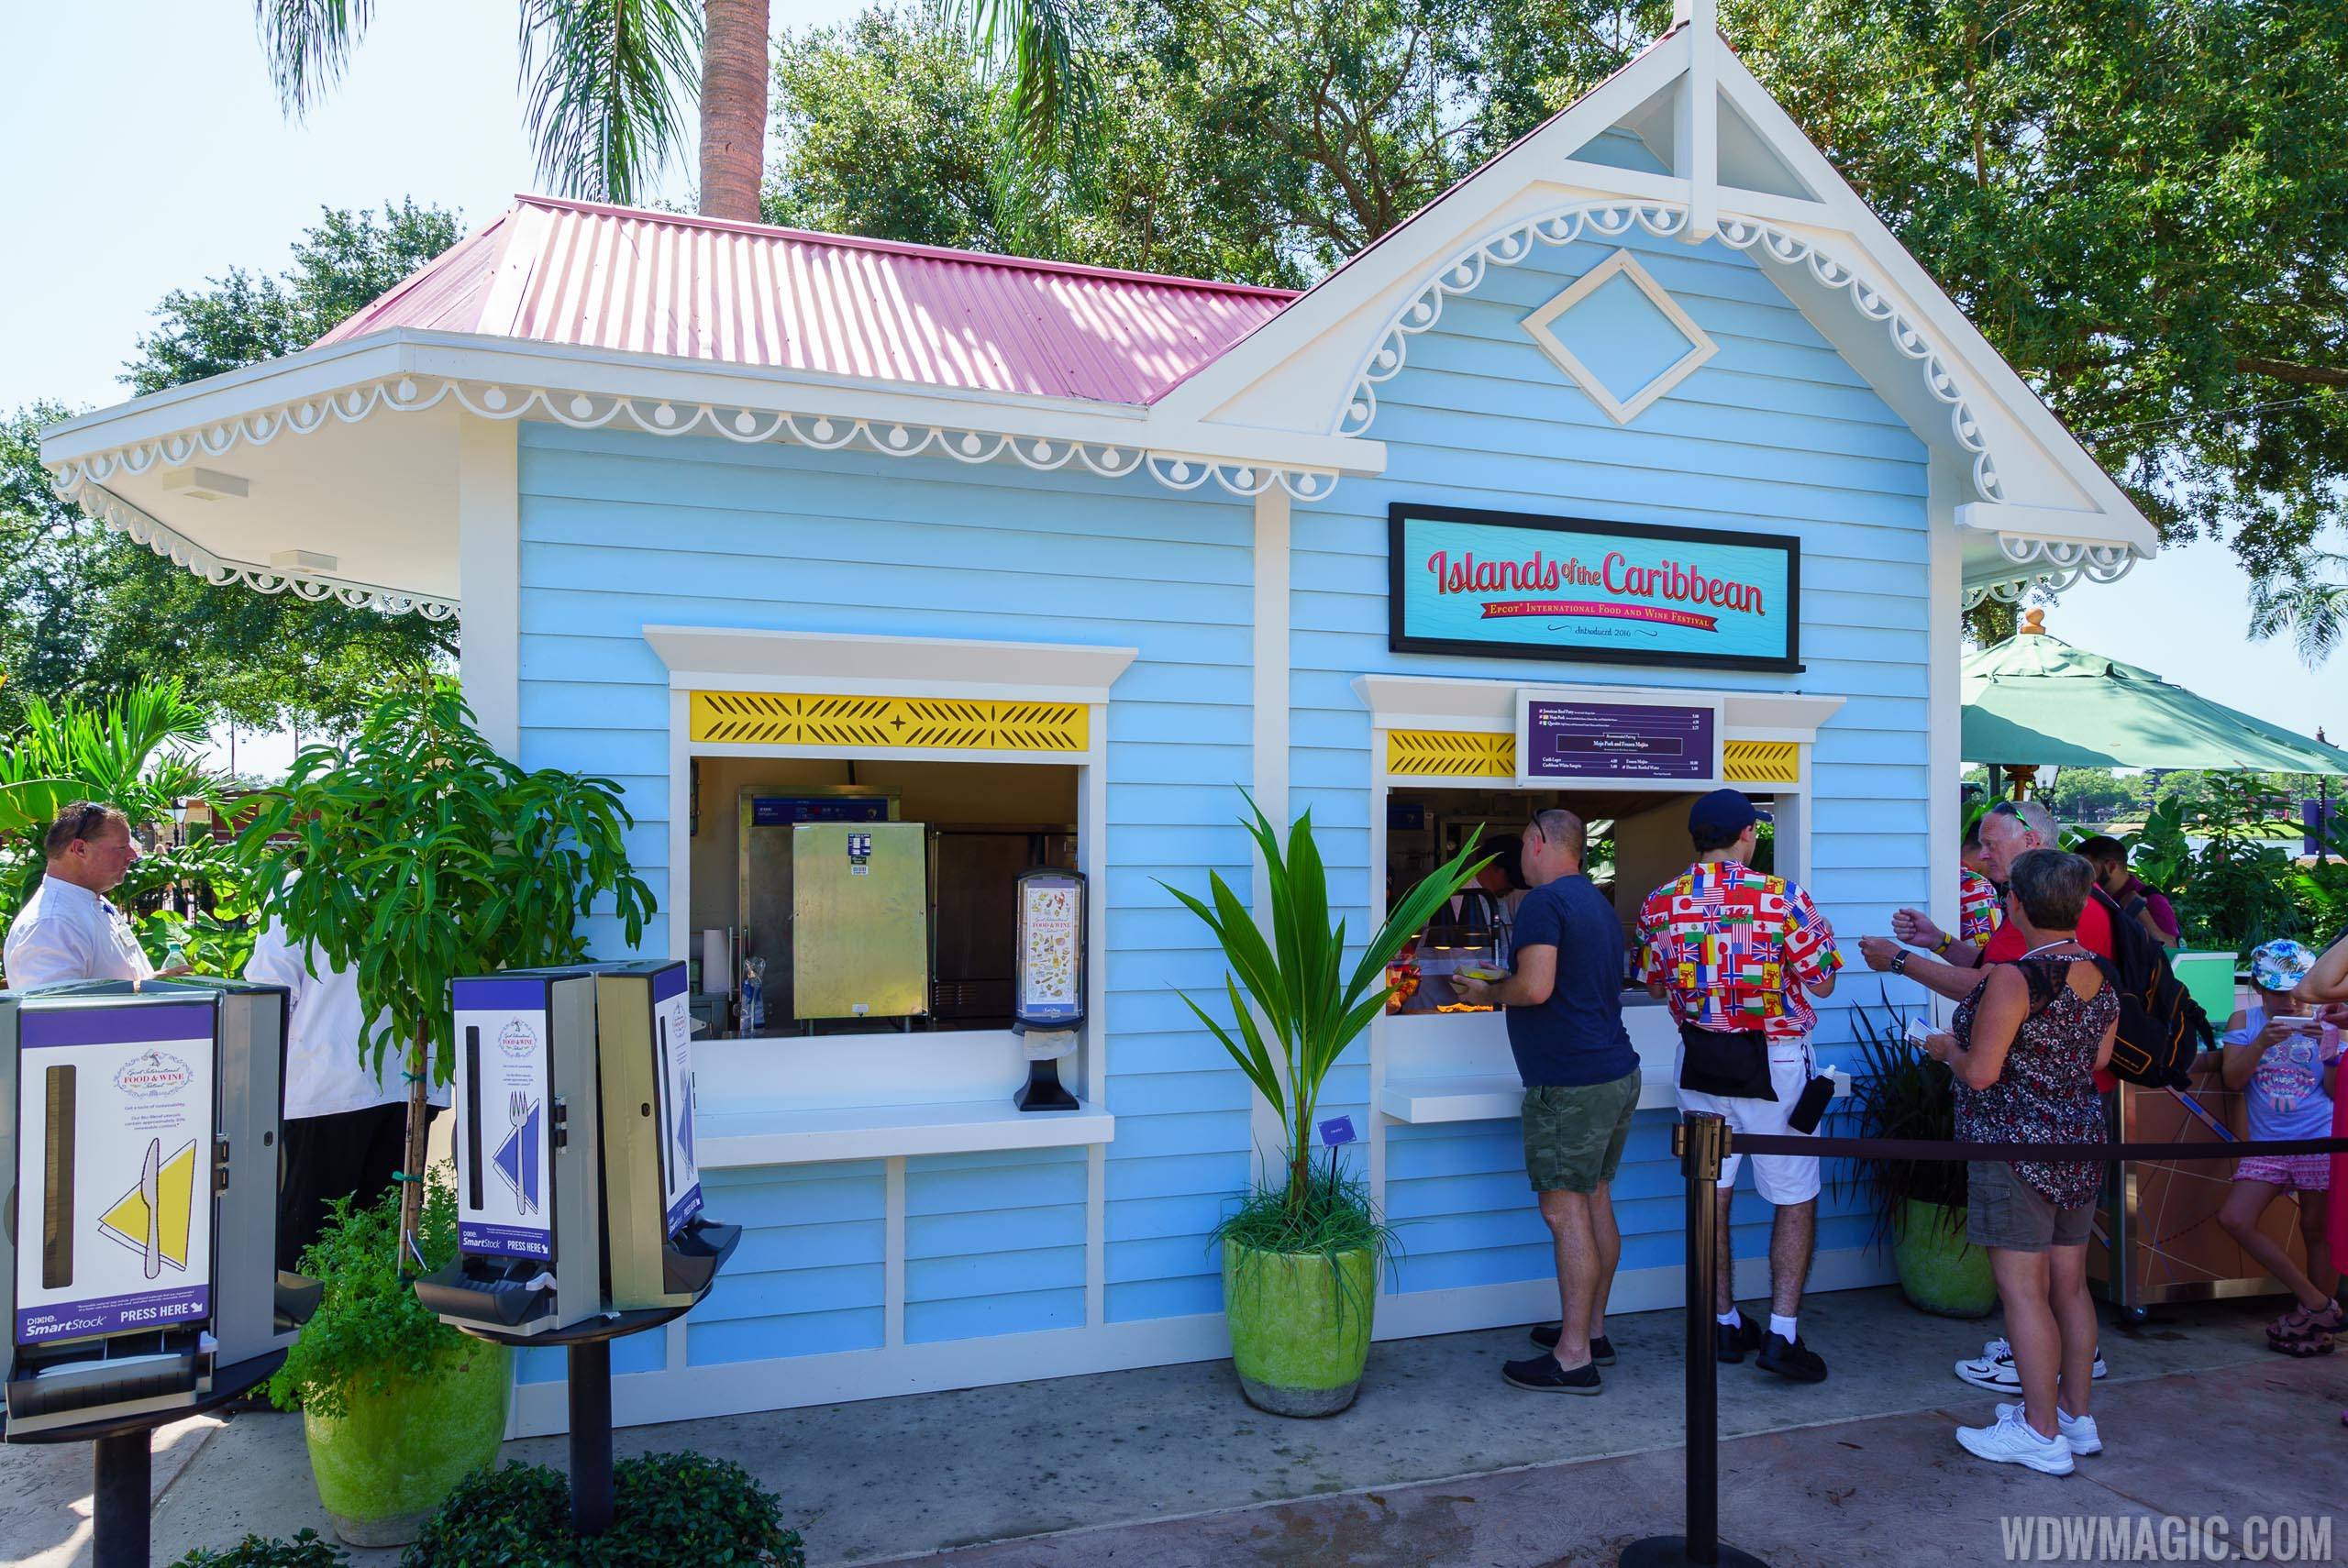 2017 Epcot Food and Wine Festival - Island of the Caribbean marketplace kiosk